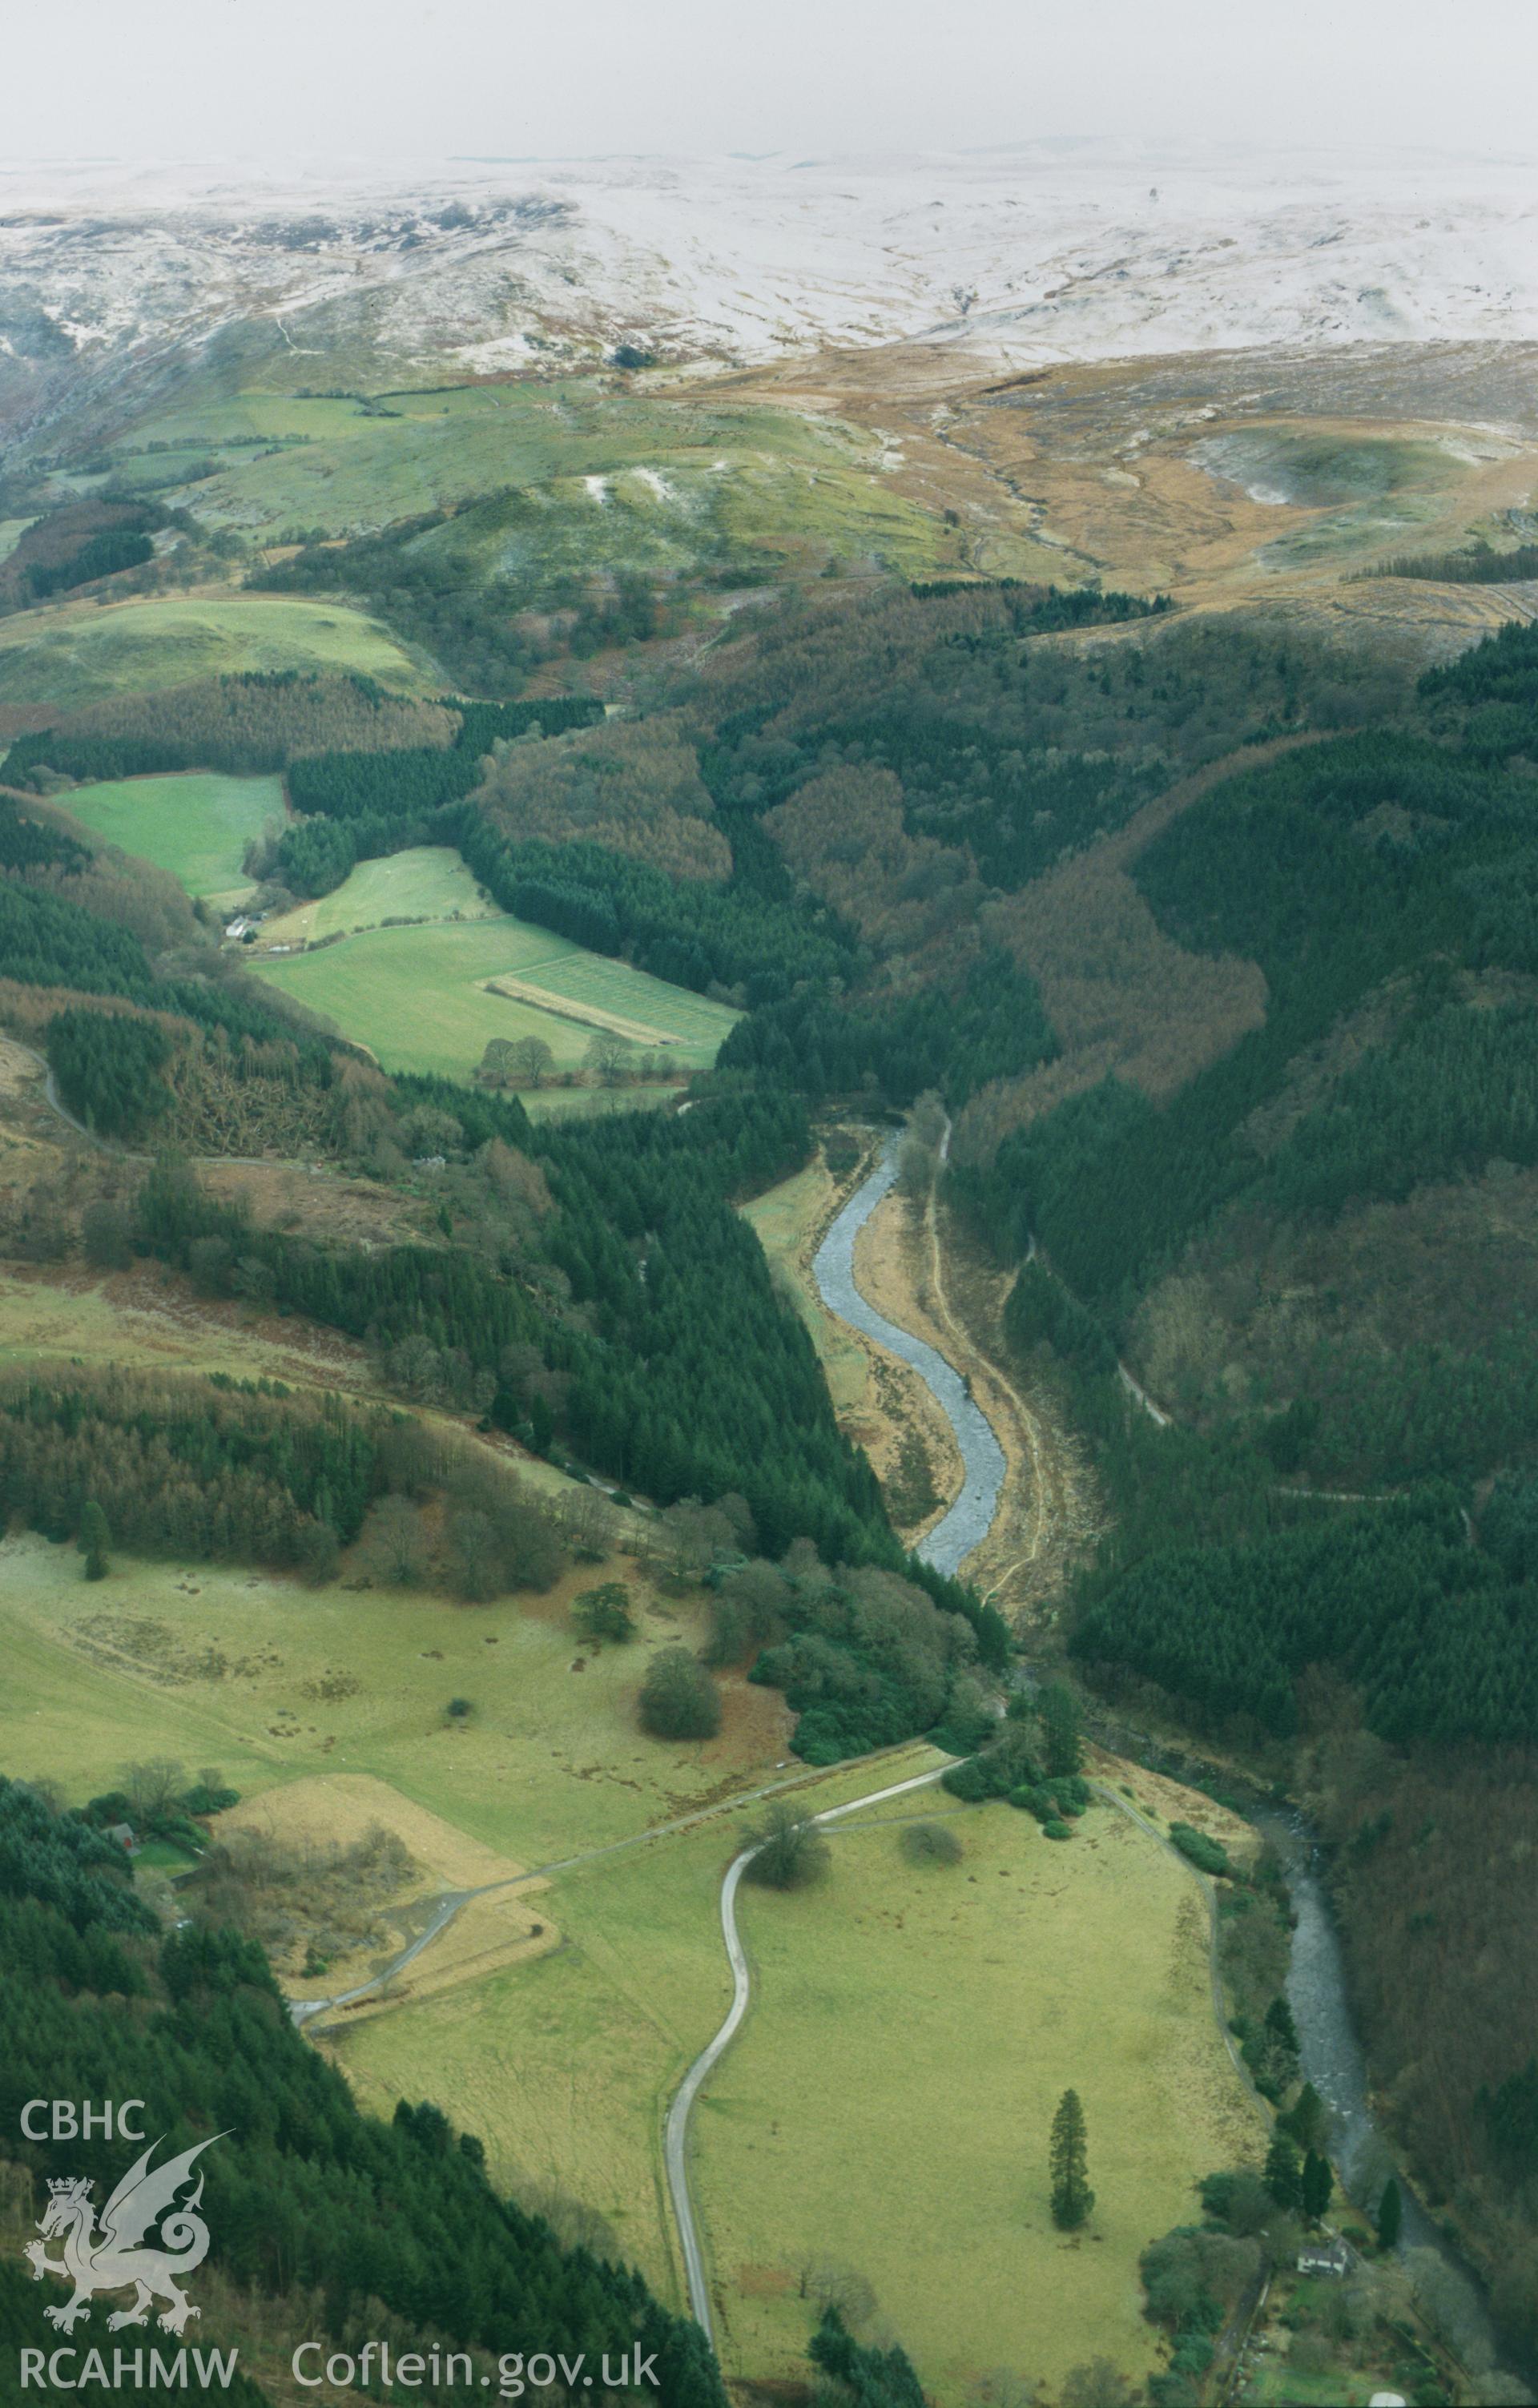 RCAHMW colour oblique aerial photograph of Hafod, general view from west, (cloudy day). Taken by Toby Driver on 31/01/2003